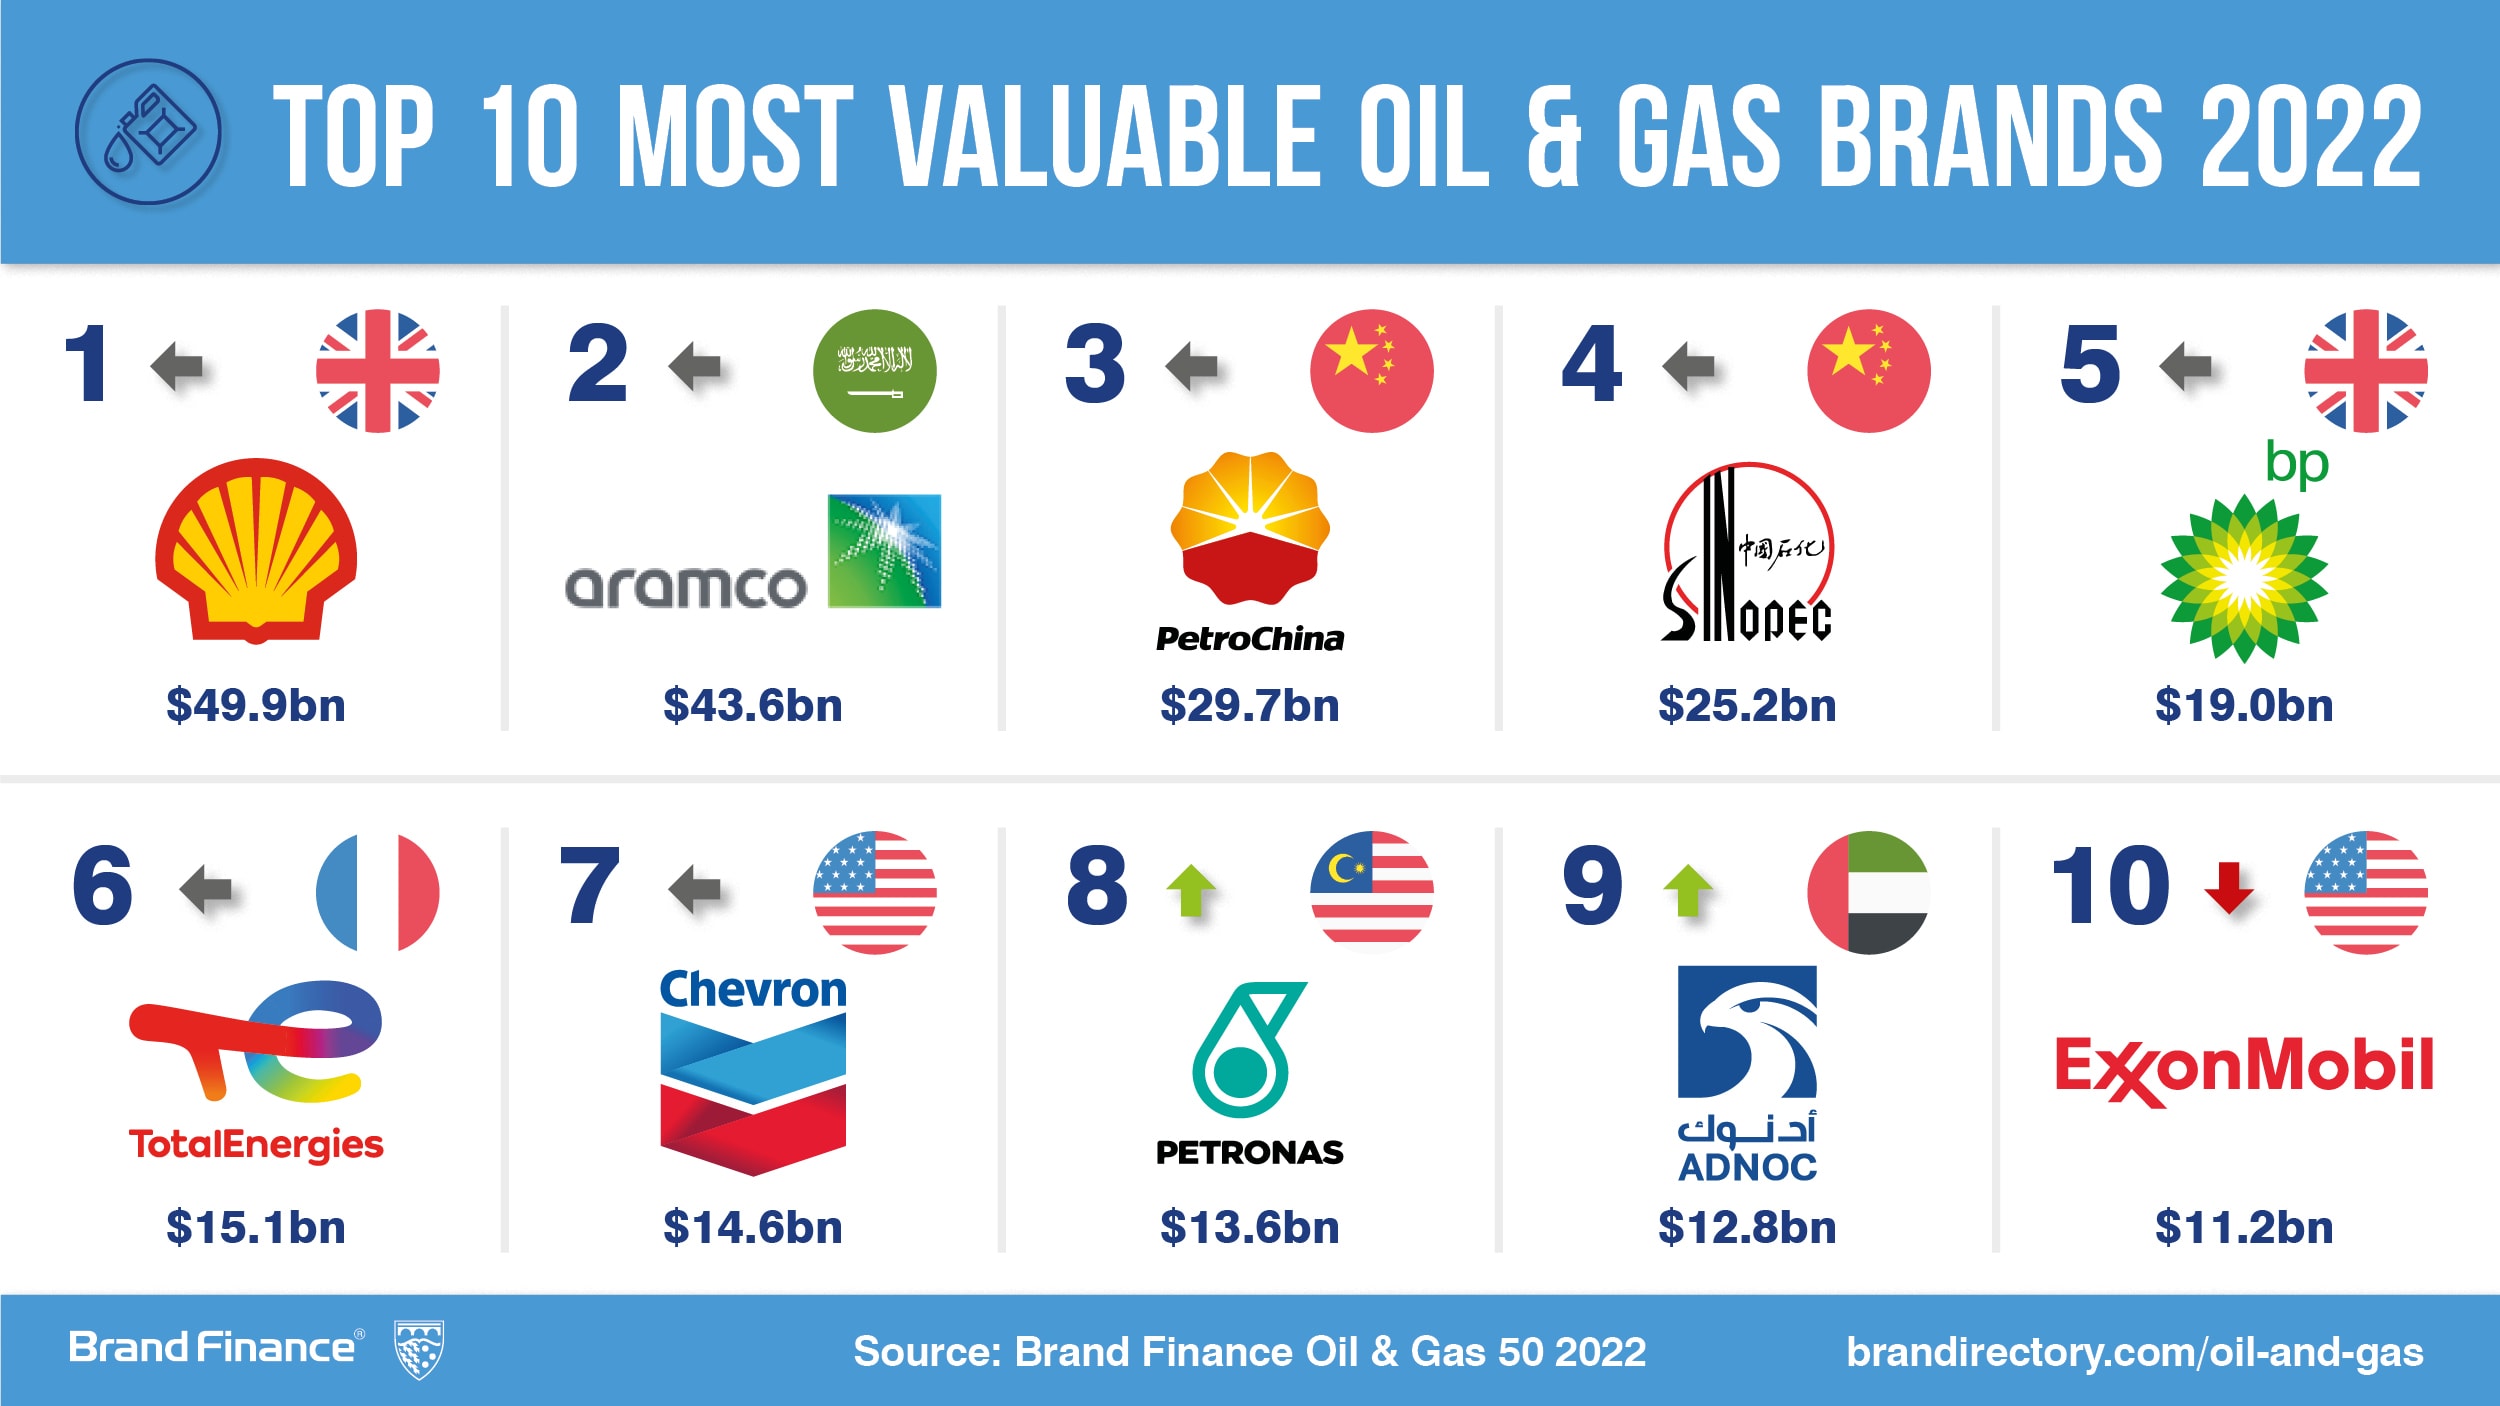 Shell leads all oil and gas brands as COVID, Ukraine and ESG issues